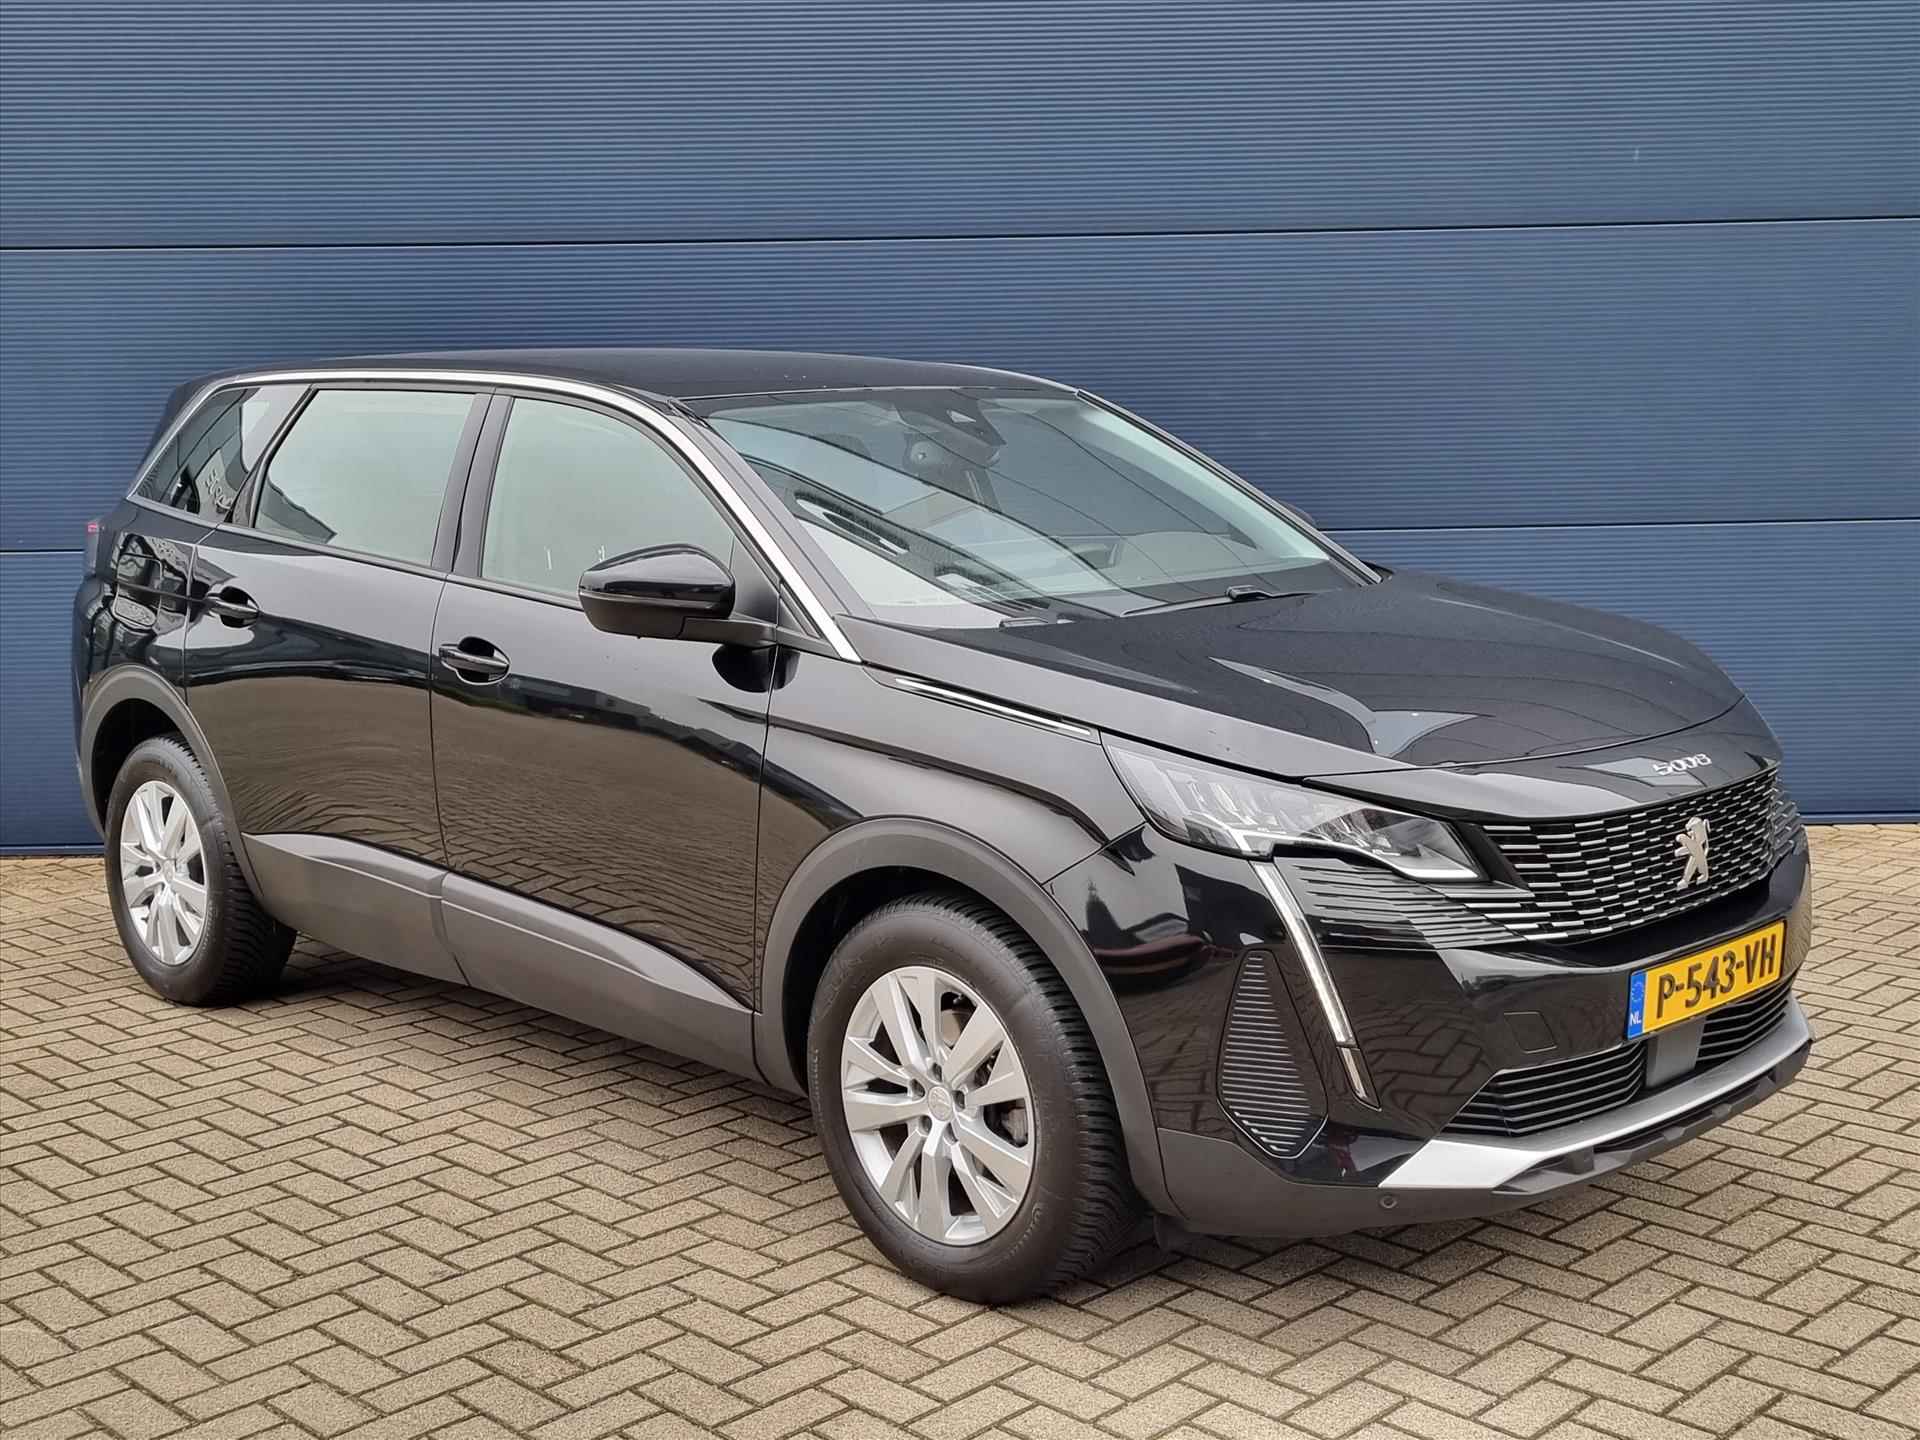 PEUGEOT 5008 1.2 Turbo 130pk Active Pack Business Automaat | Navigatie | Camera | All Season Banden | 7-Persoons | Climate Control | Parkeersensoren V+A | - 7/46